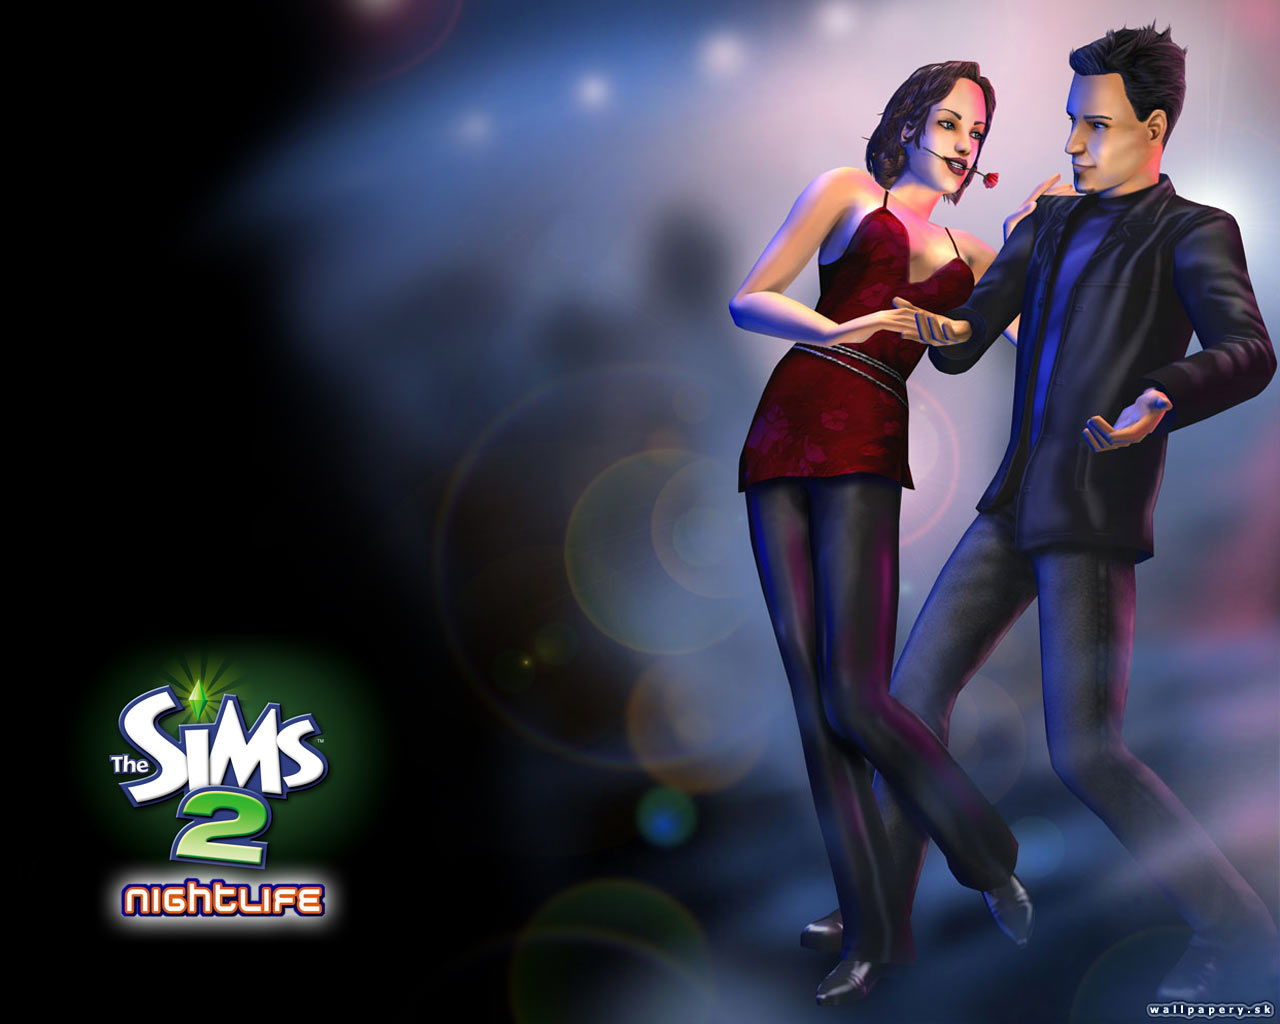 The Sims 2: Nightlife - wallpaper 1